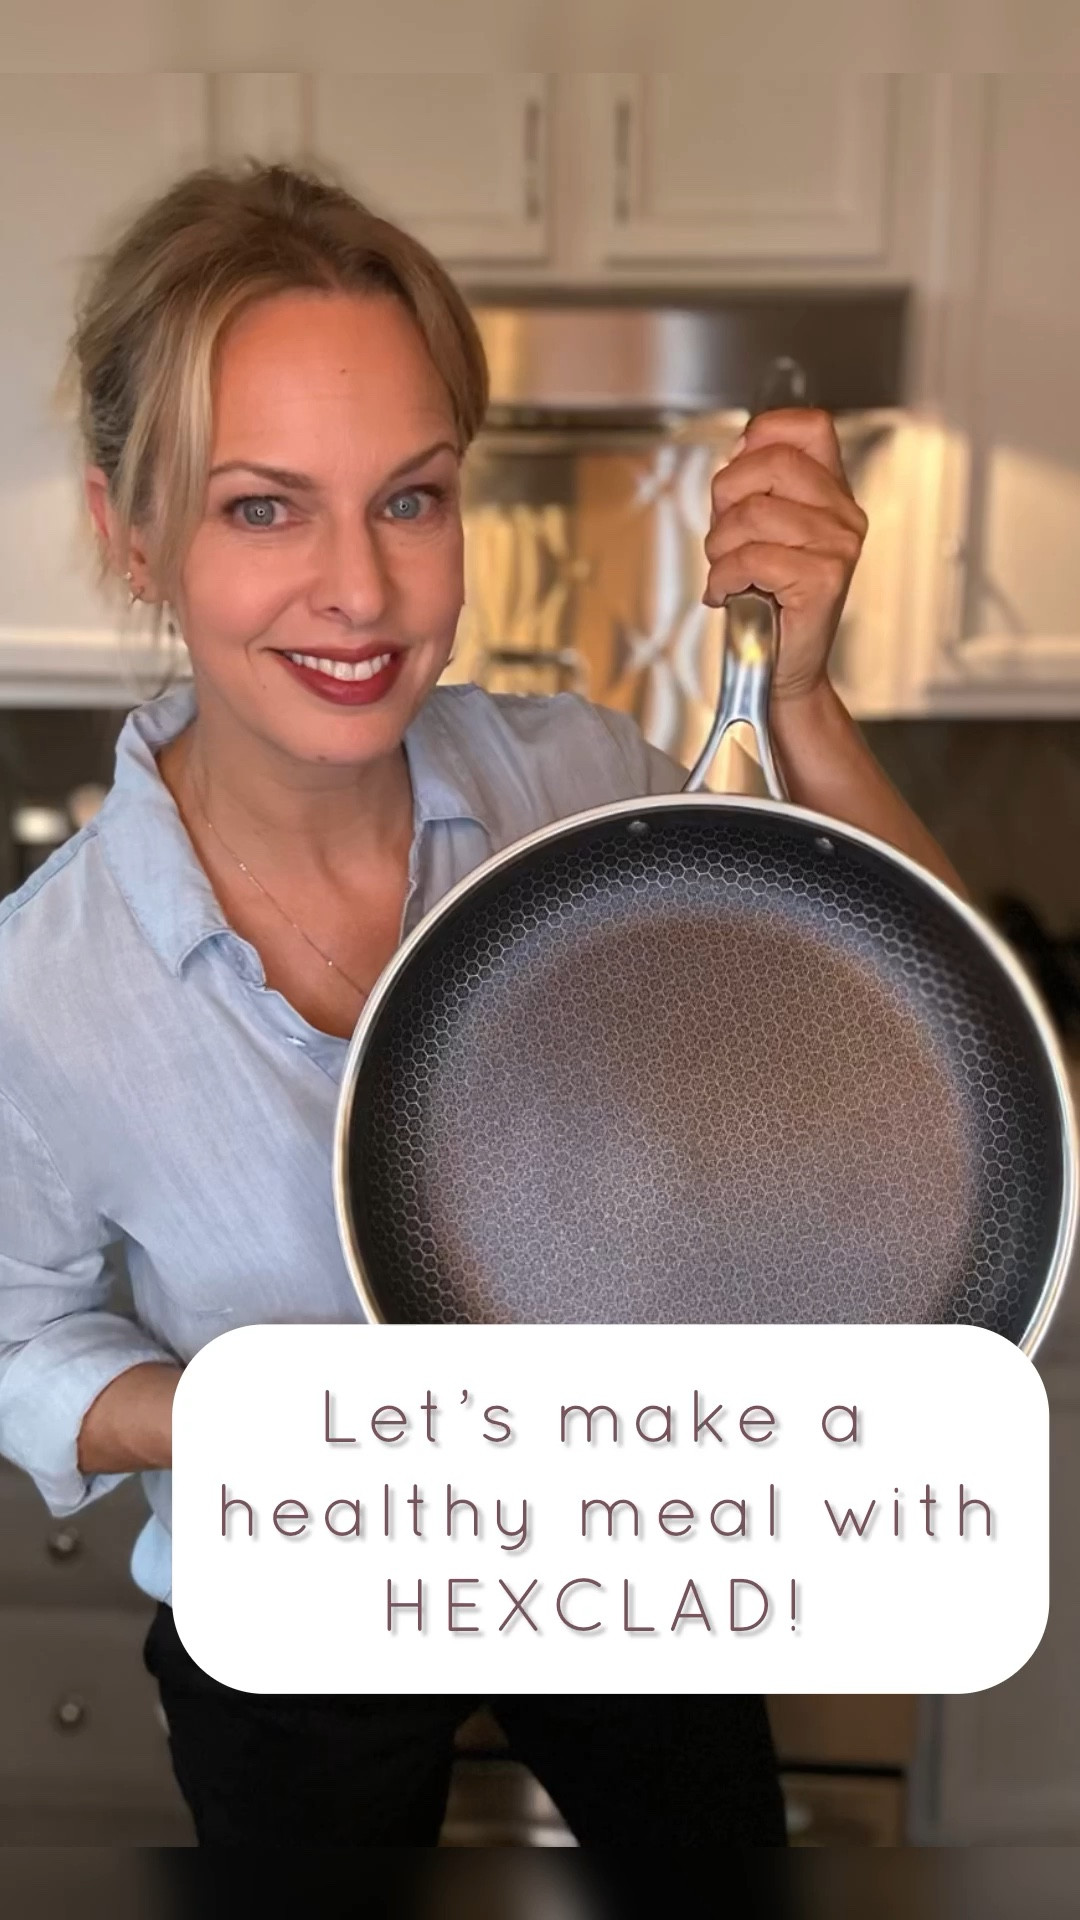 Hexclad Cookware: A Review of the Hybrid Cookware Brand